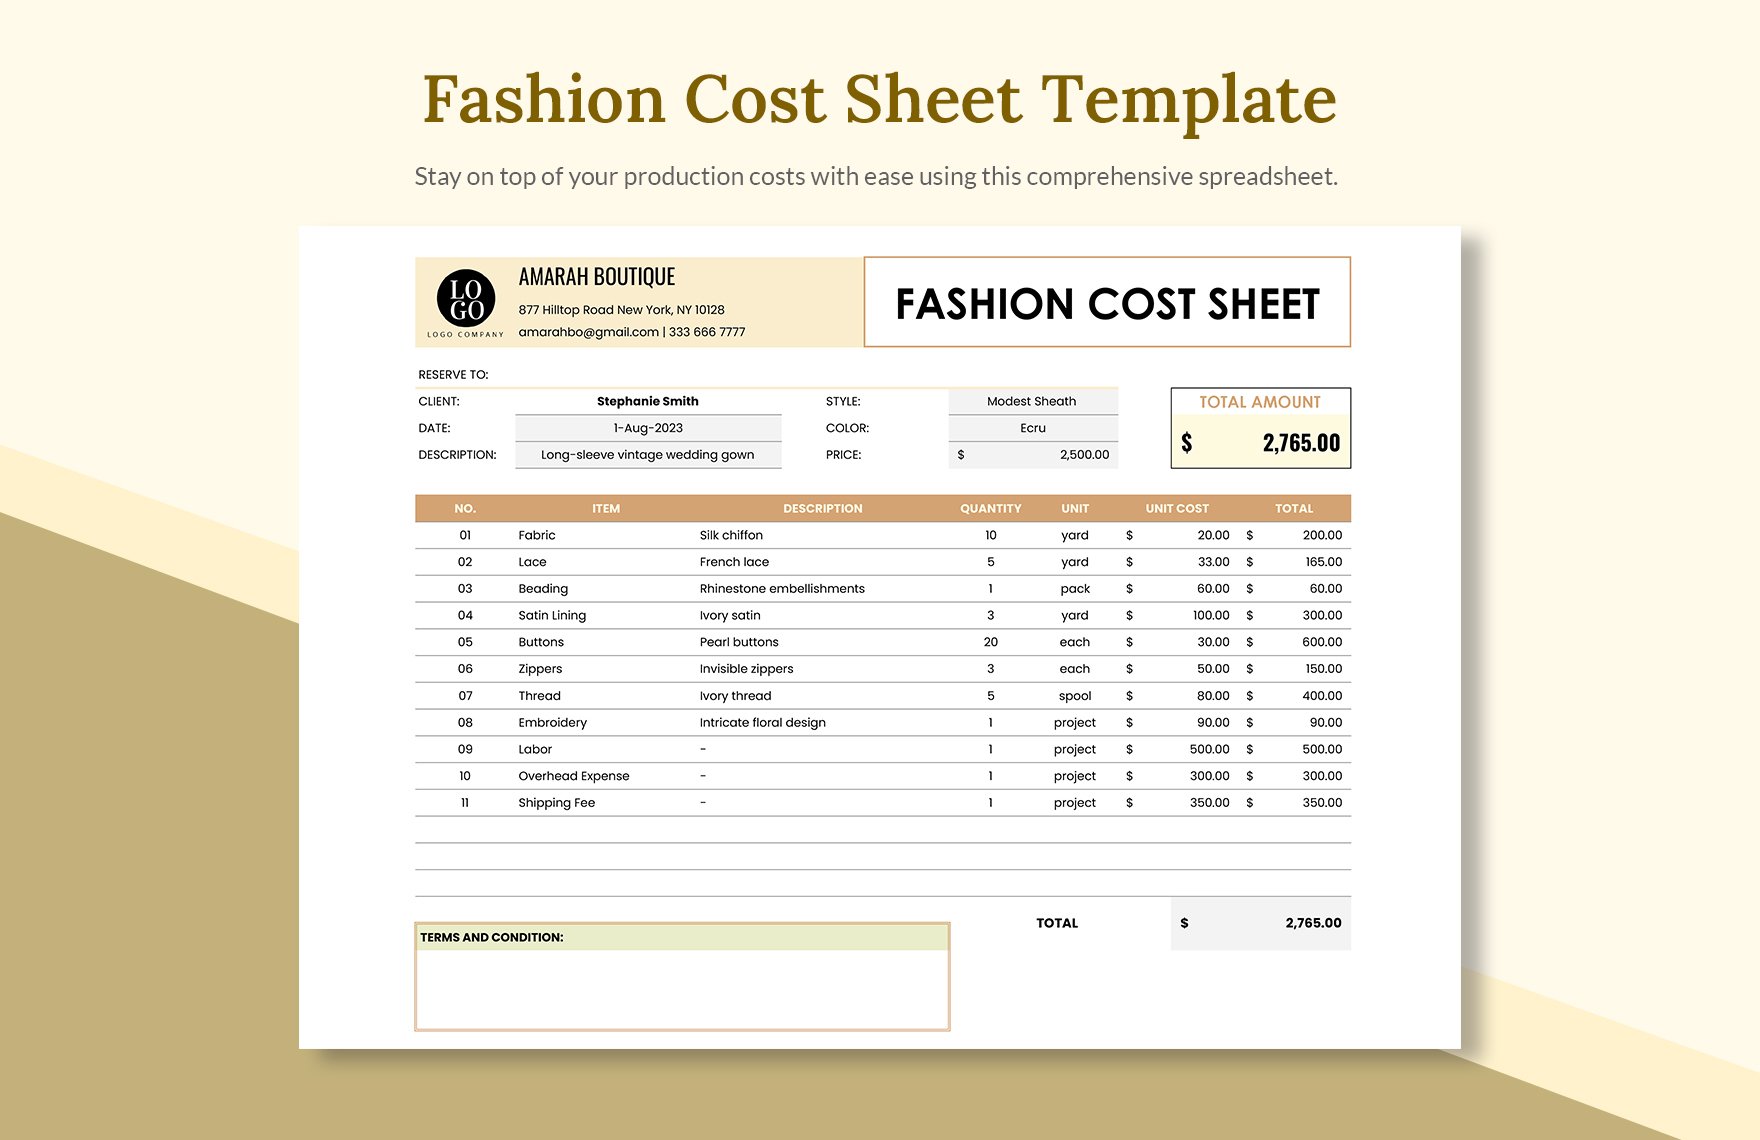 Fashion Cost Sheet Template in Excel, Google Sheets